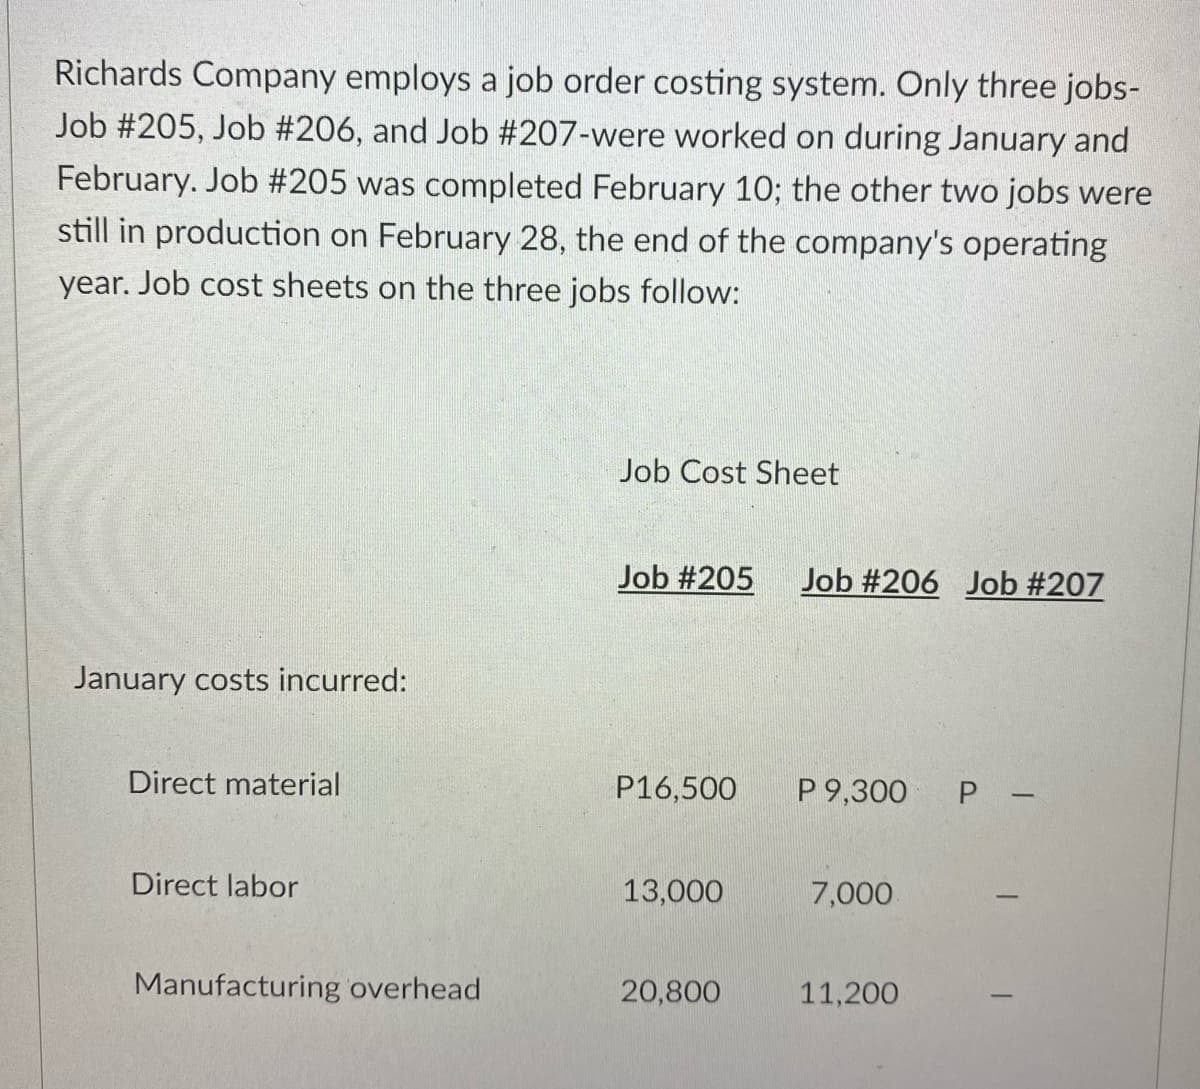 Richards Company employs a job order costing system. Only three jobs-
Job #205, Job #206, and Job #207-were worked on during January and
February. Job #205 was completed February 10; the other two jobs were
still in production on February 28, the end of the company's operating
year. Job cost sheets on the three jobs follow:
Job Cost Sheet
Job #205
Job #206 Job #207
January costs incurred:
Direct material
P16,500
P 9,300
P -
Direct labor
13,000
7,000
Manufacturing overhead
20,800
11,200
